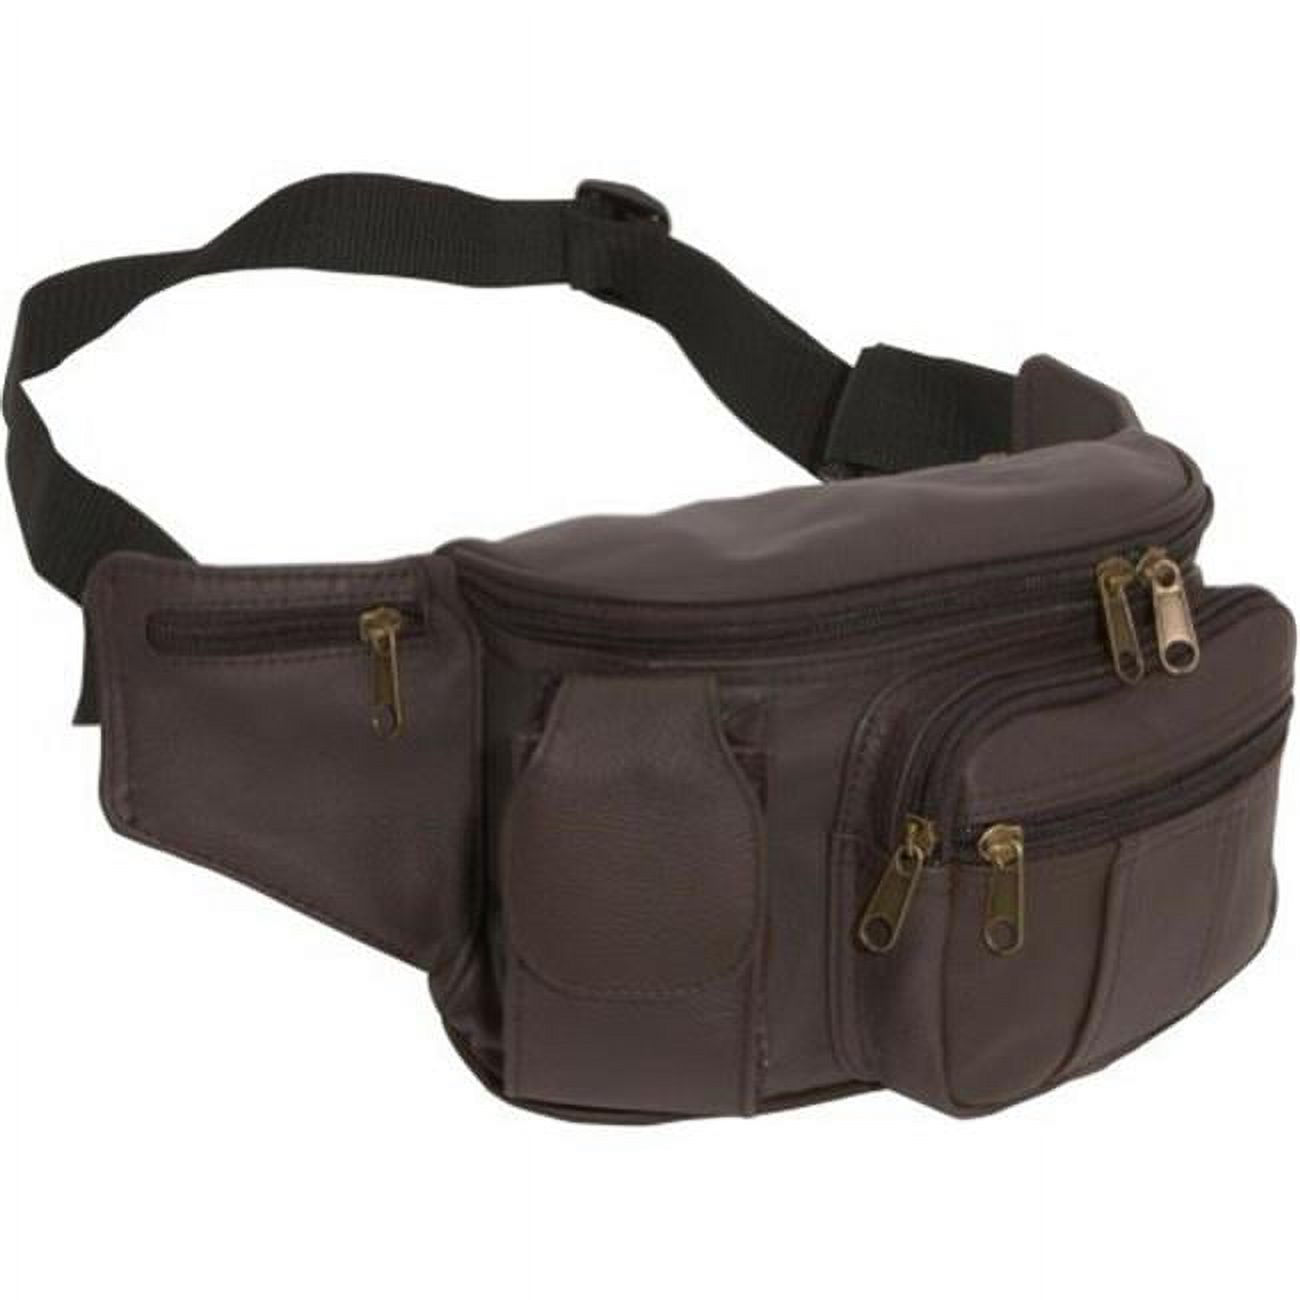 Leather Cell Phone/ Fanny Pack - image 1 of 2